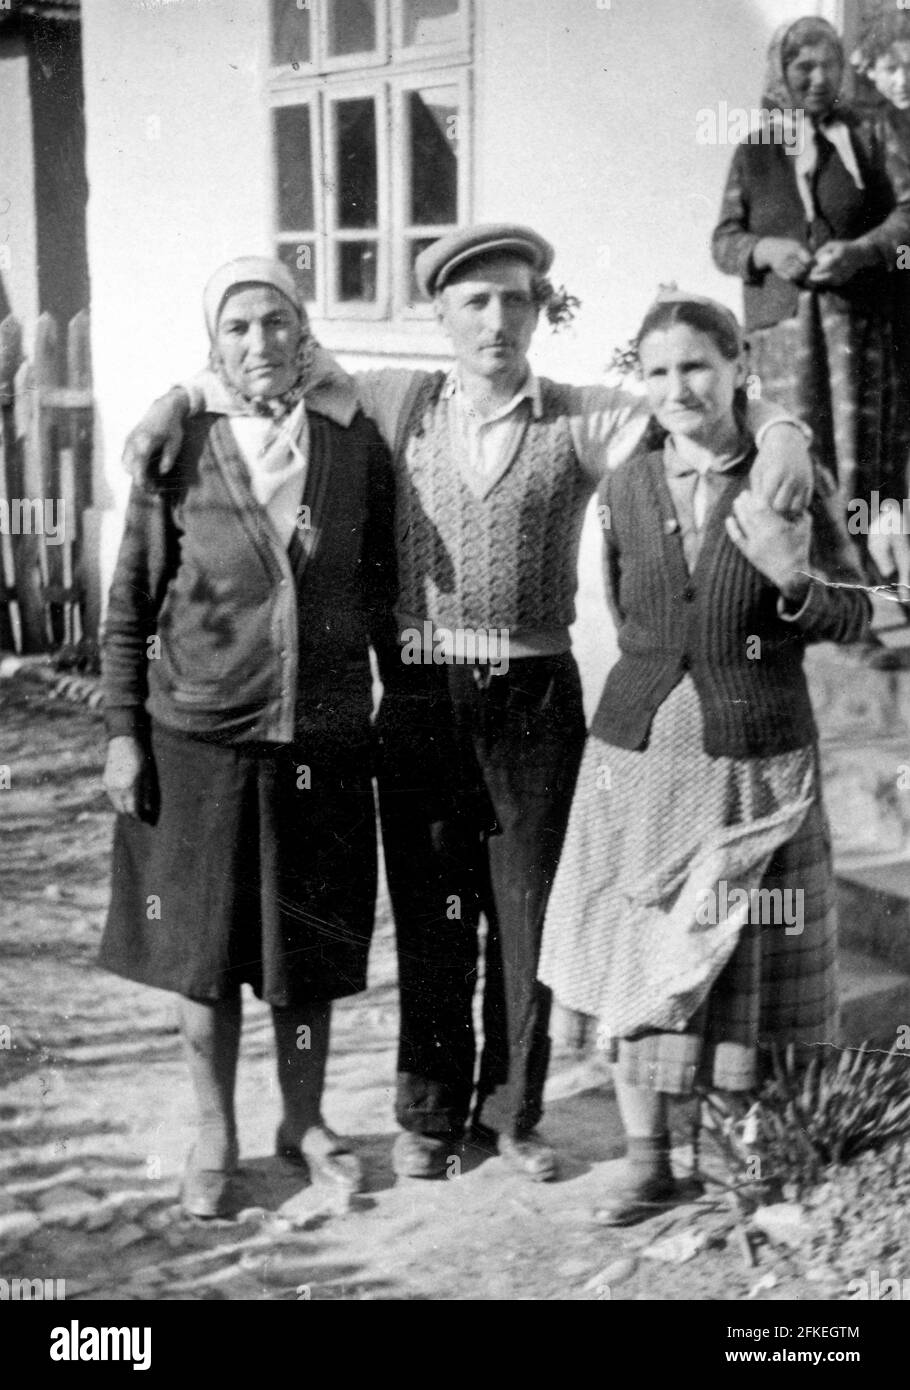 Family portrait of ordinary village people in Bulgaria, Eastern Europe circa 1950s Stock Photo